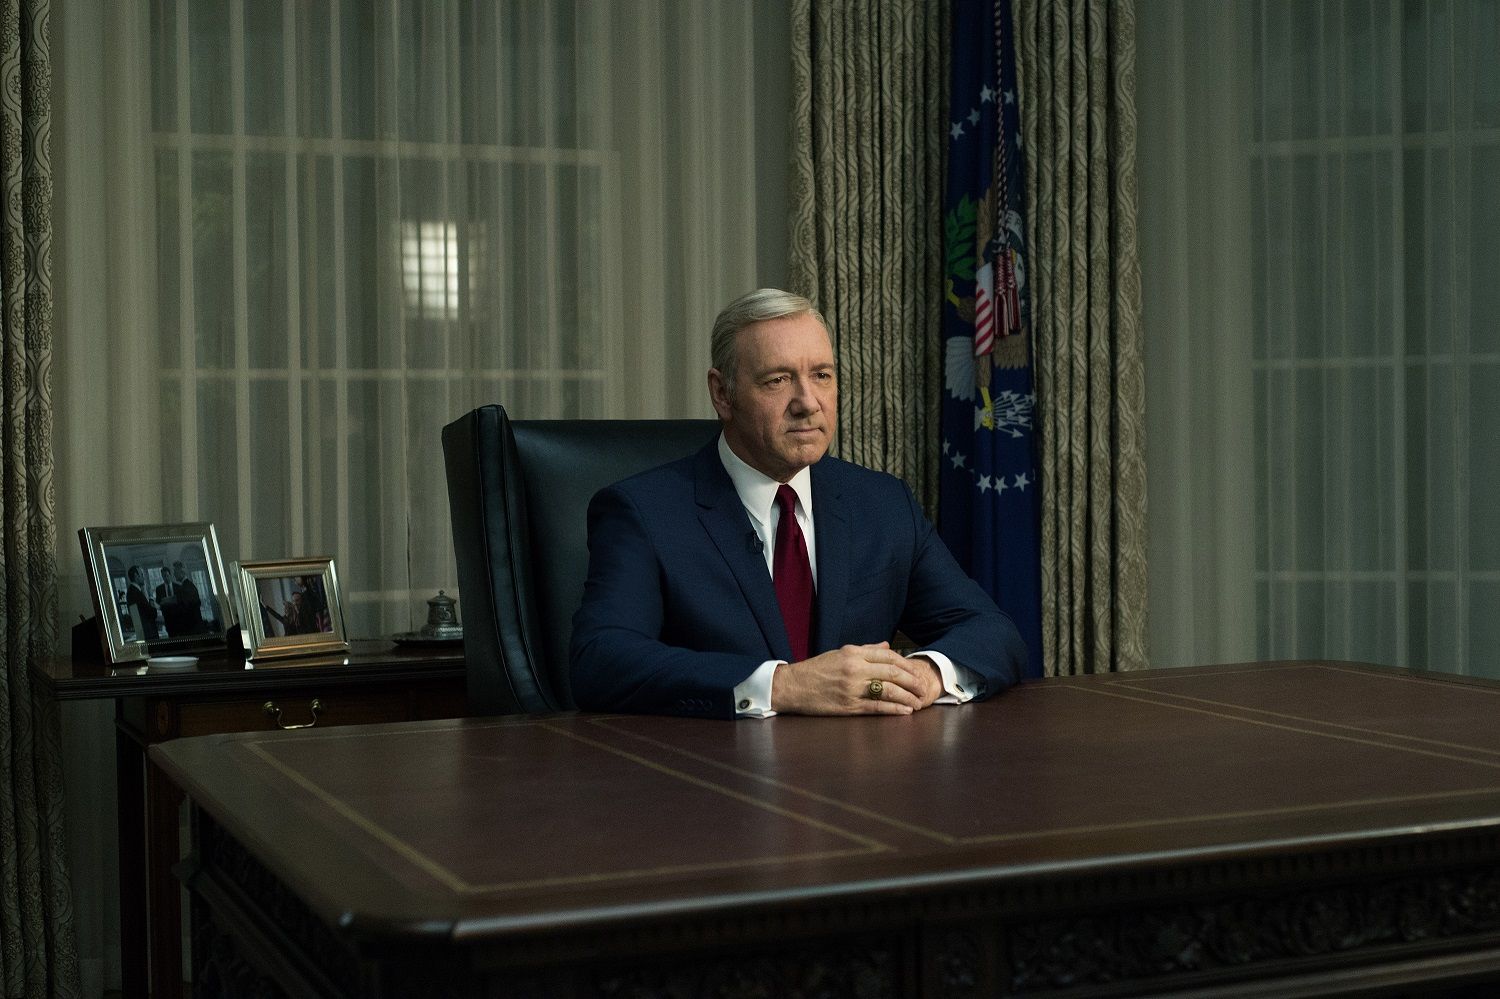 Will Frank Underwood make a leader the country deserves?